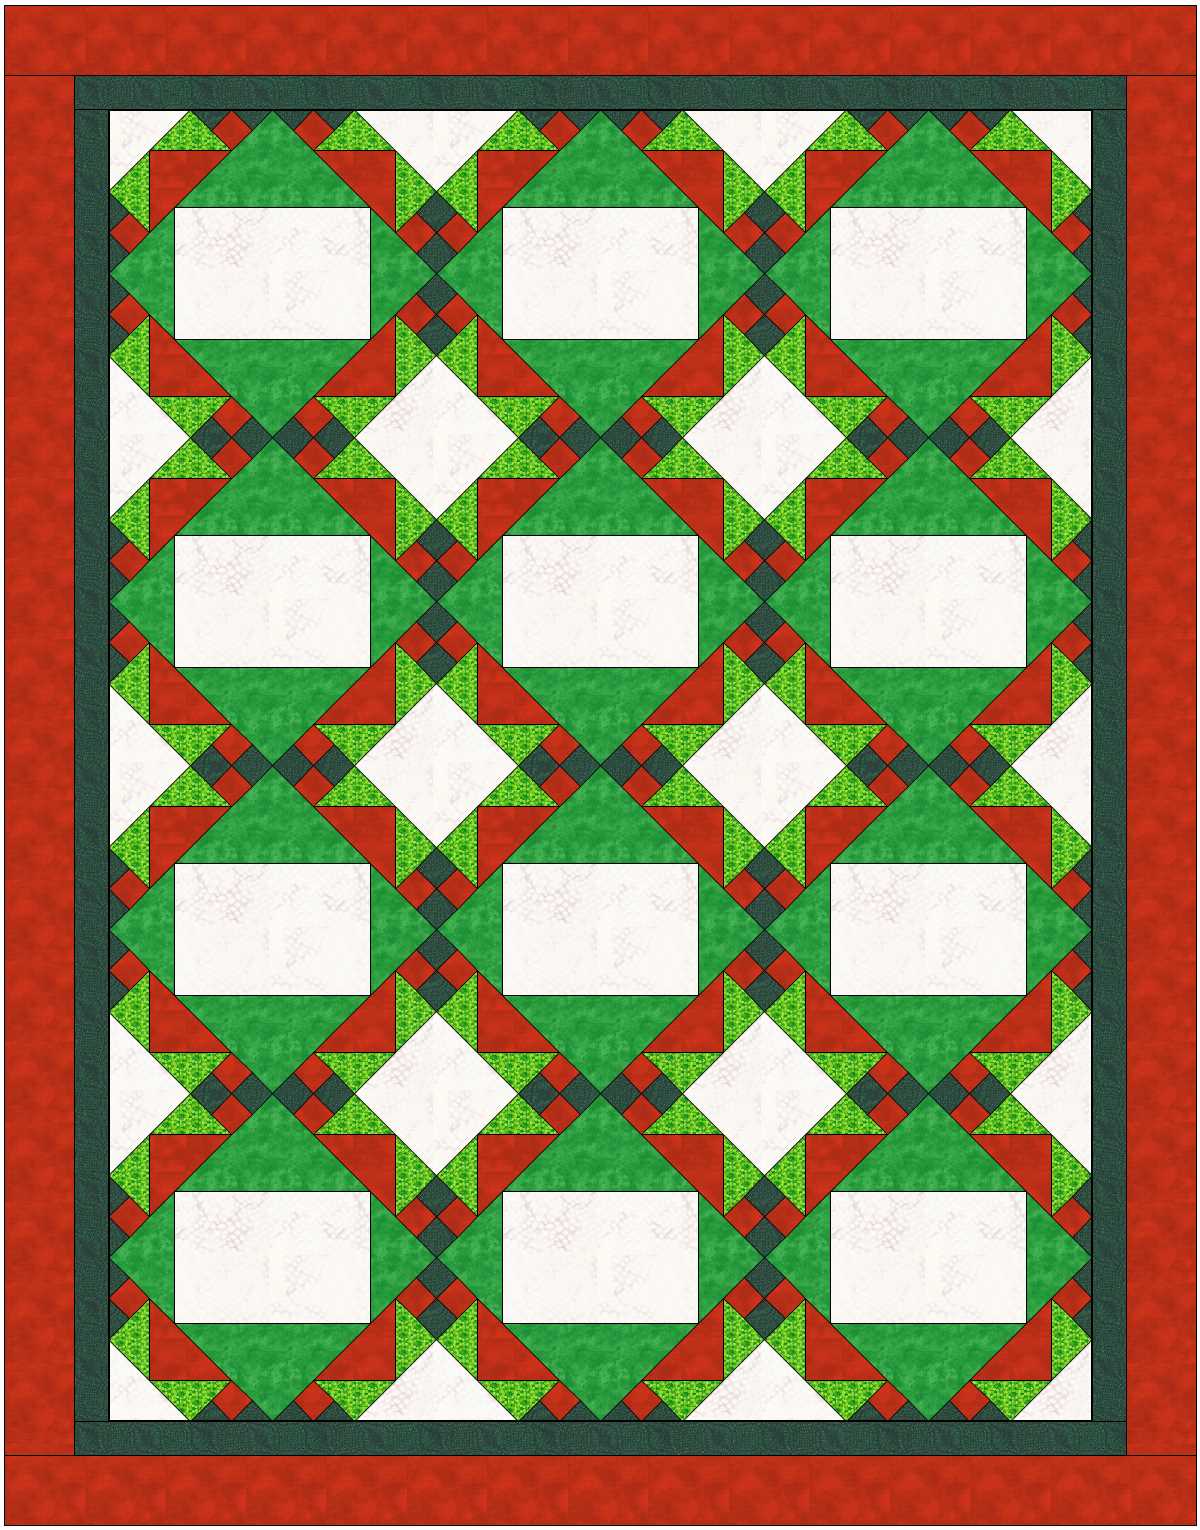 Embroidery Frames Quilt Pattern